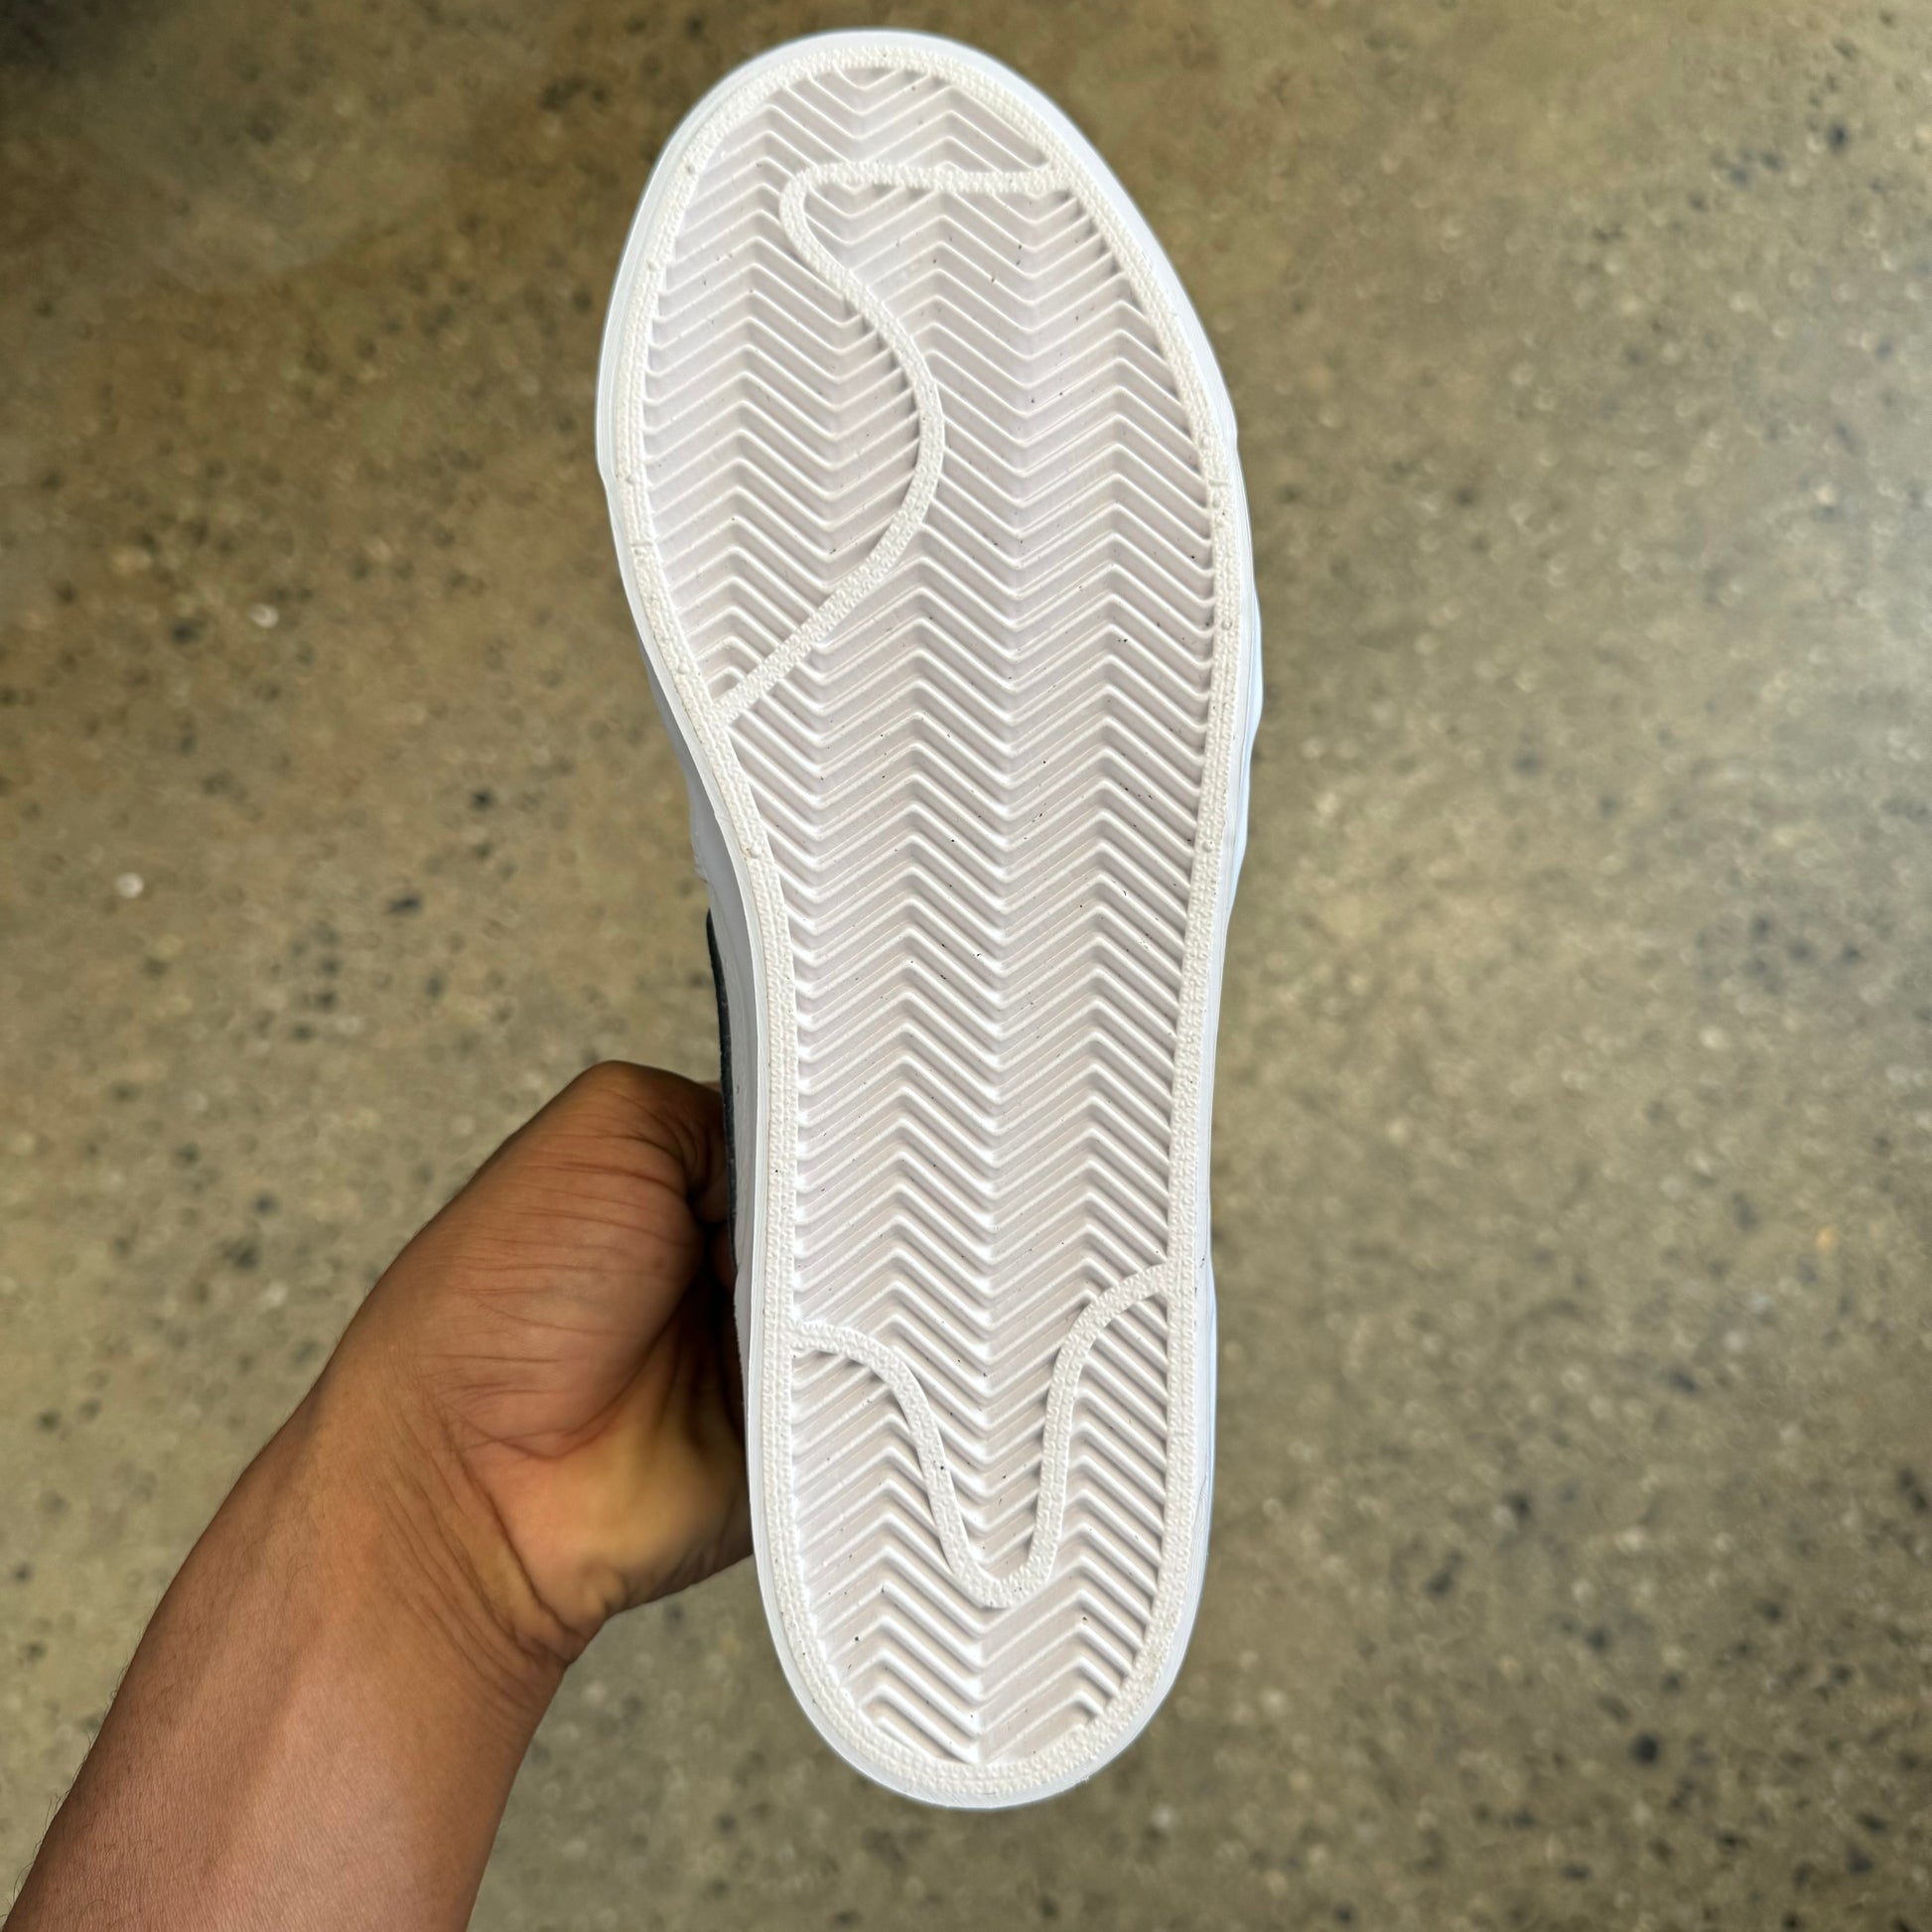 bottom view of the shoe. white rubber sole